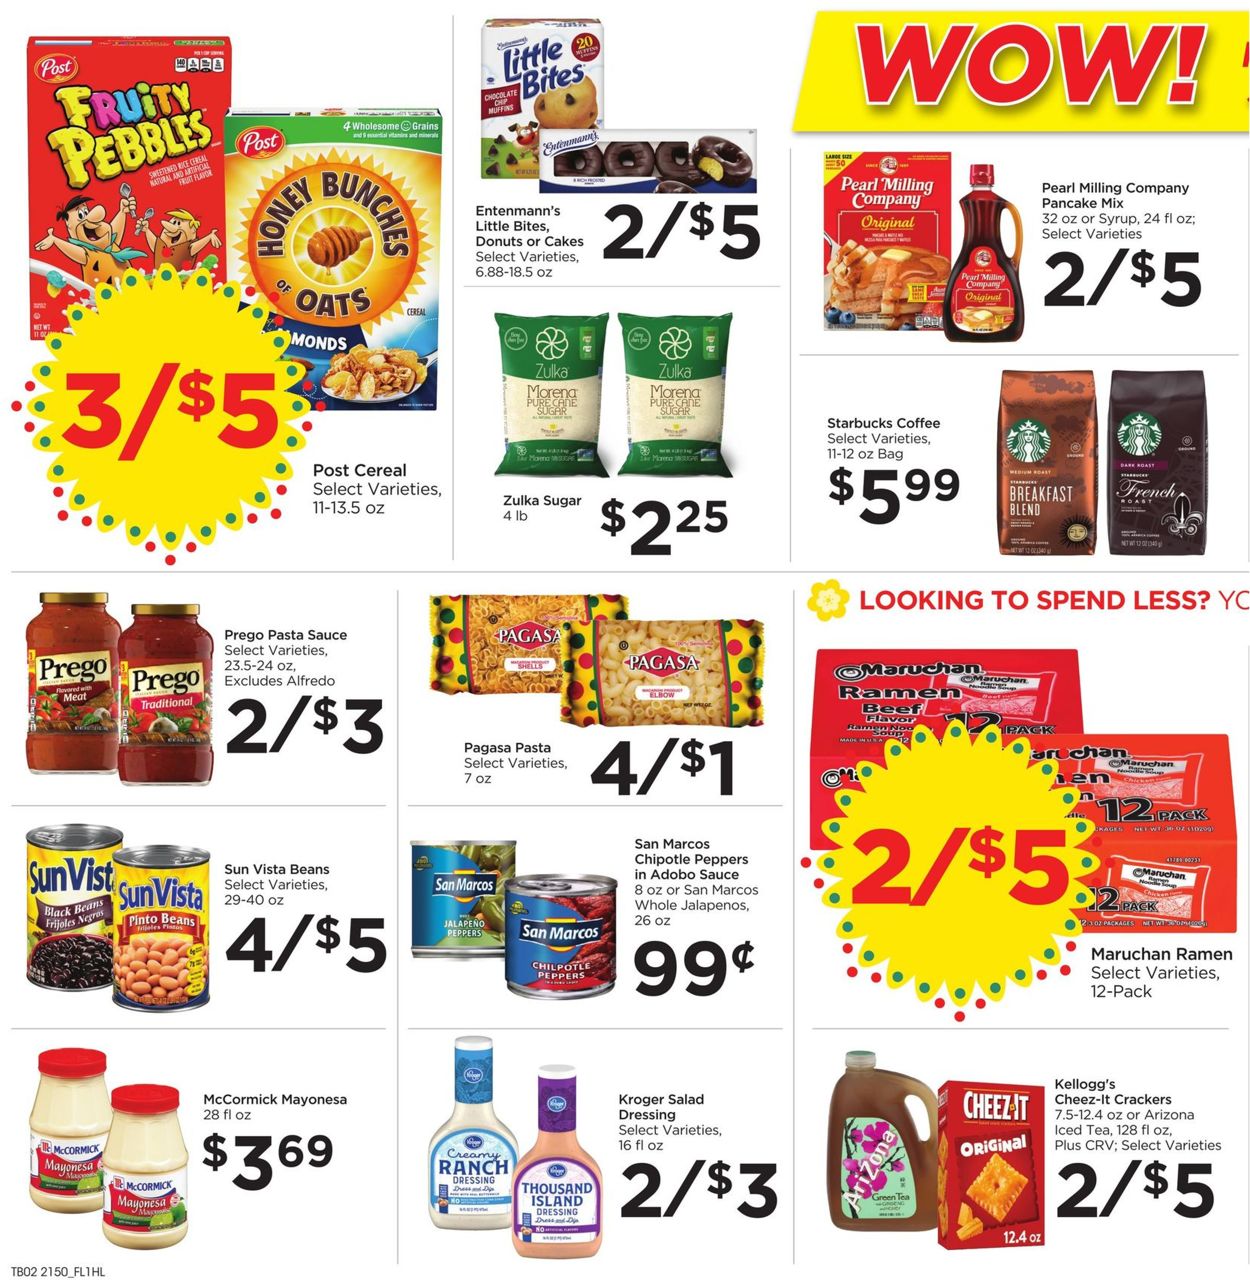 Catalogue Food 4 Less from 01/12/2022